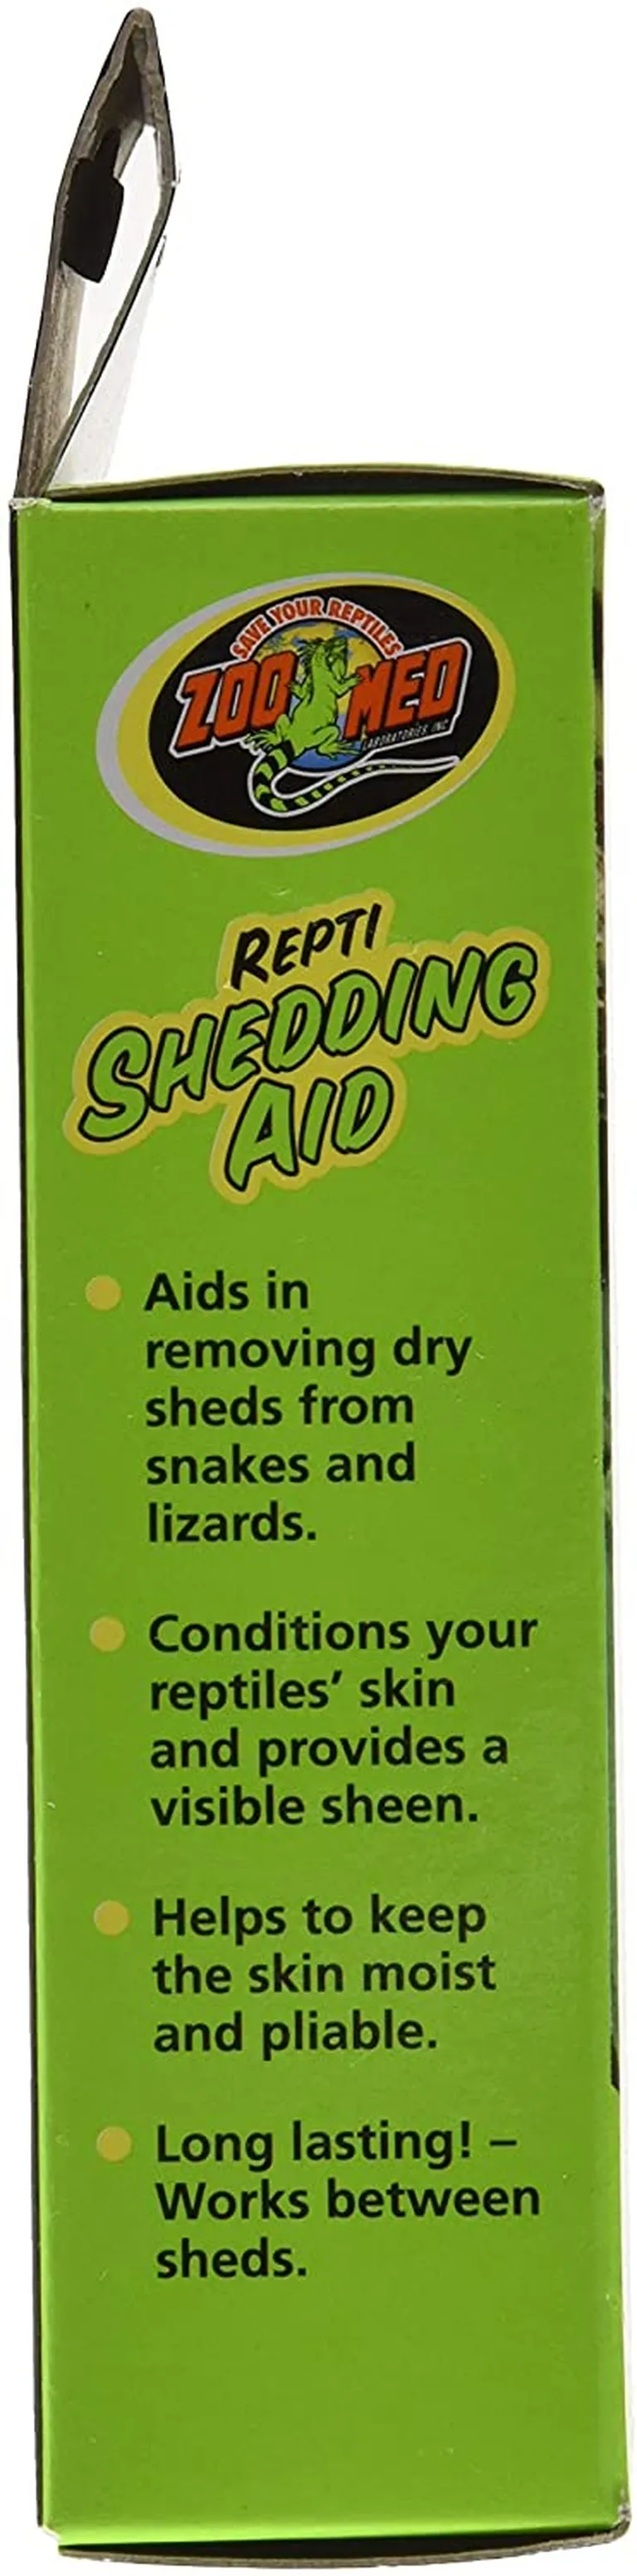 Zoo Med Repti Shedding Aid for Reptiles Photo 1